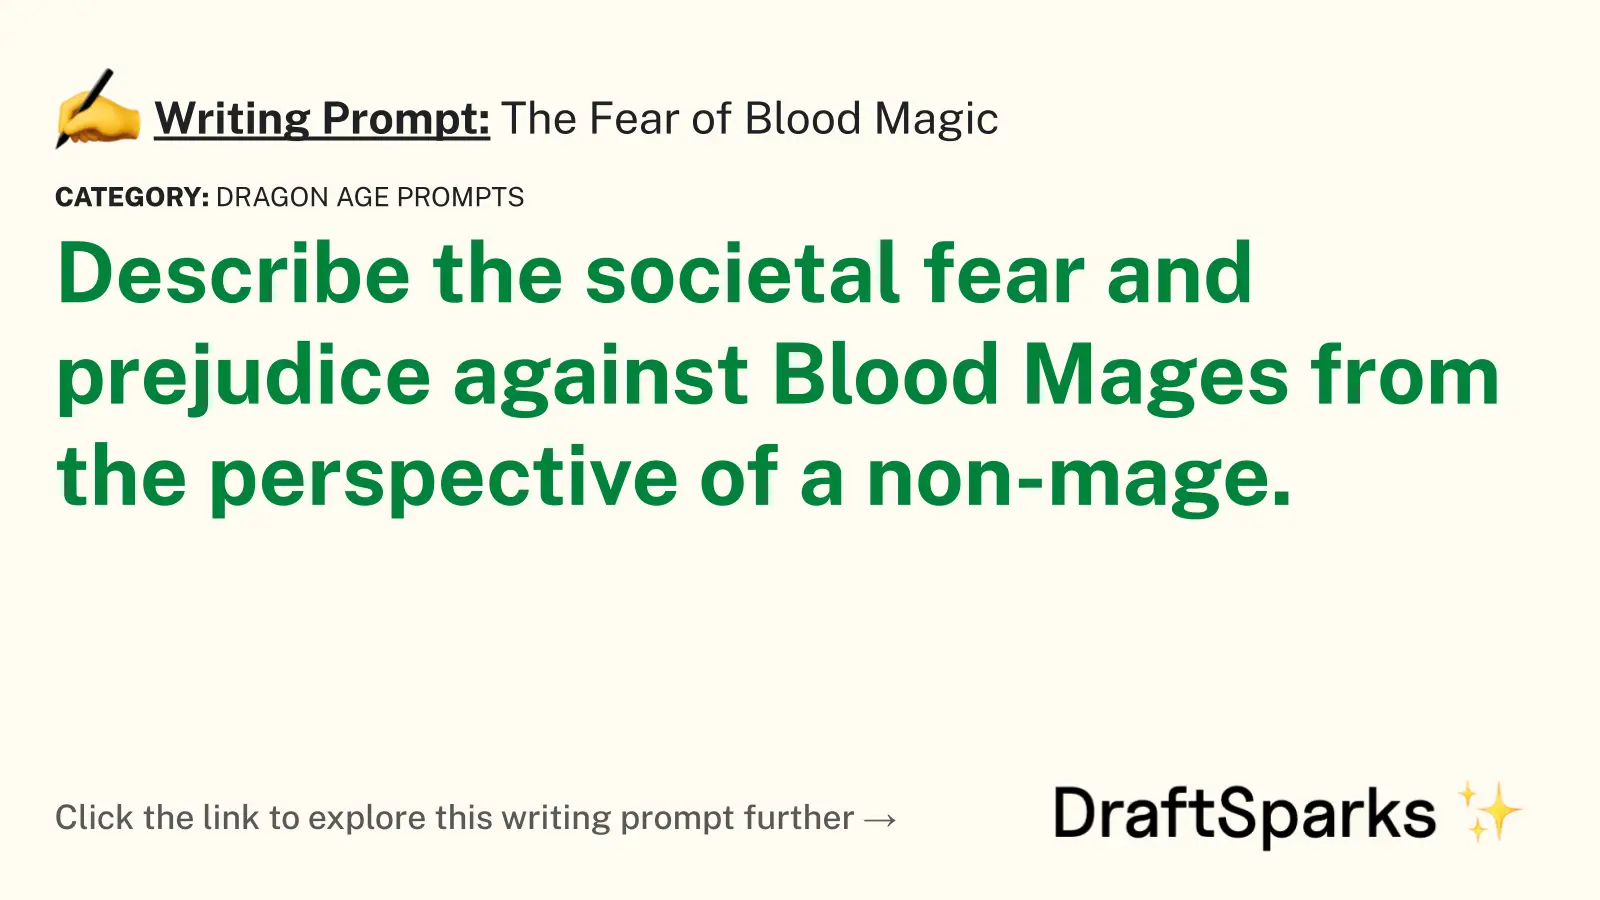 The Fear of Blood Magic